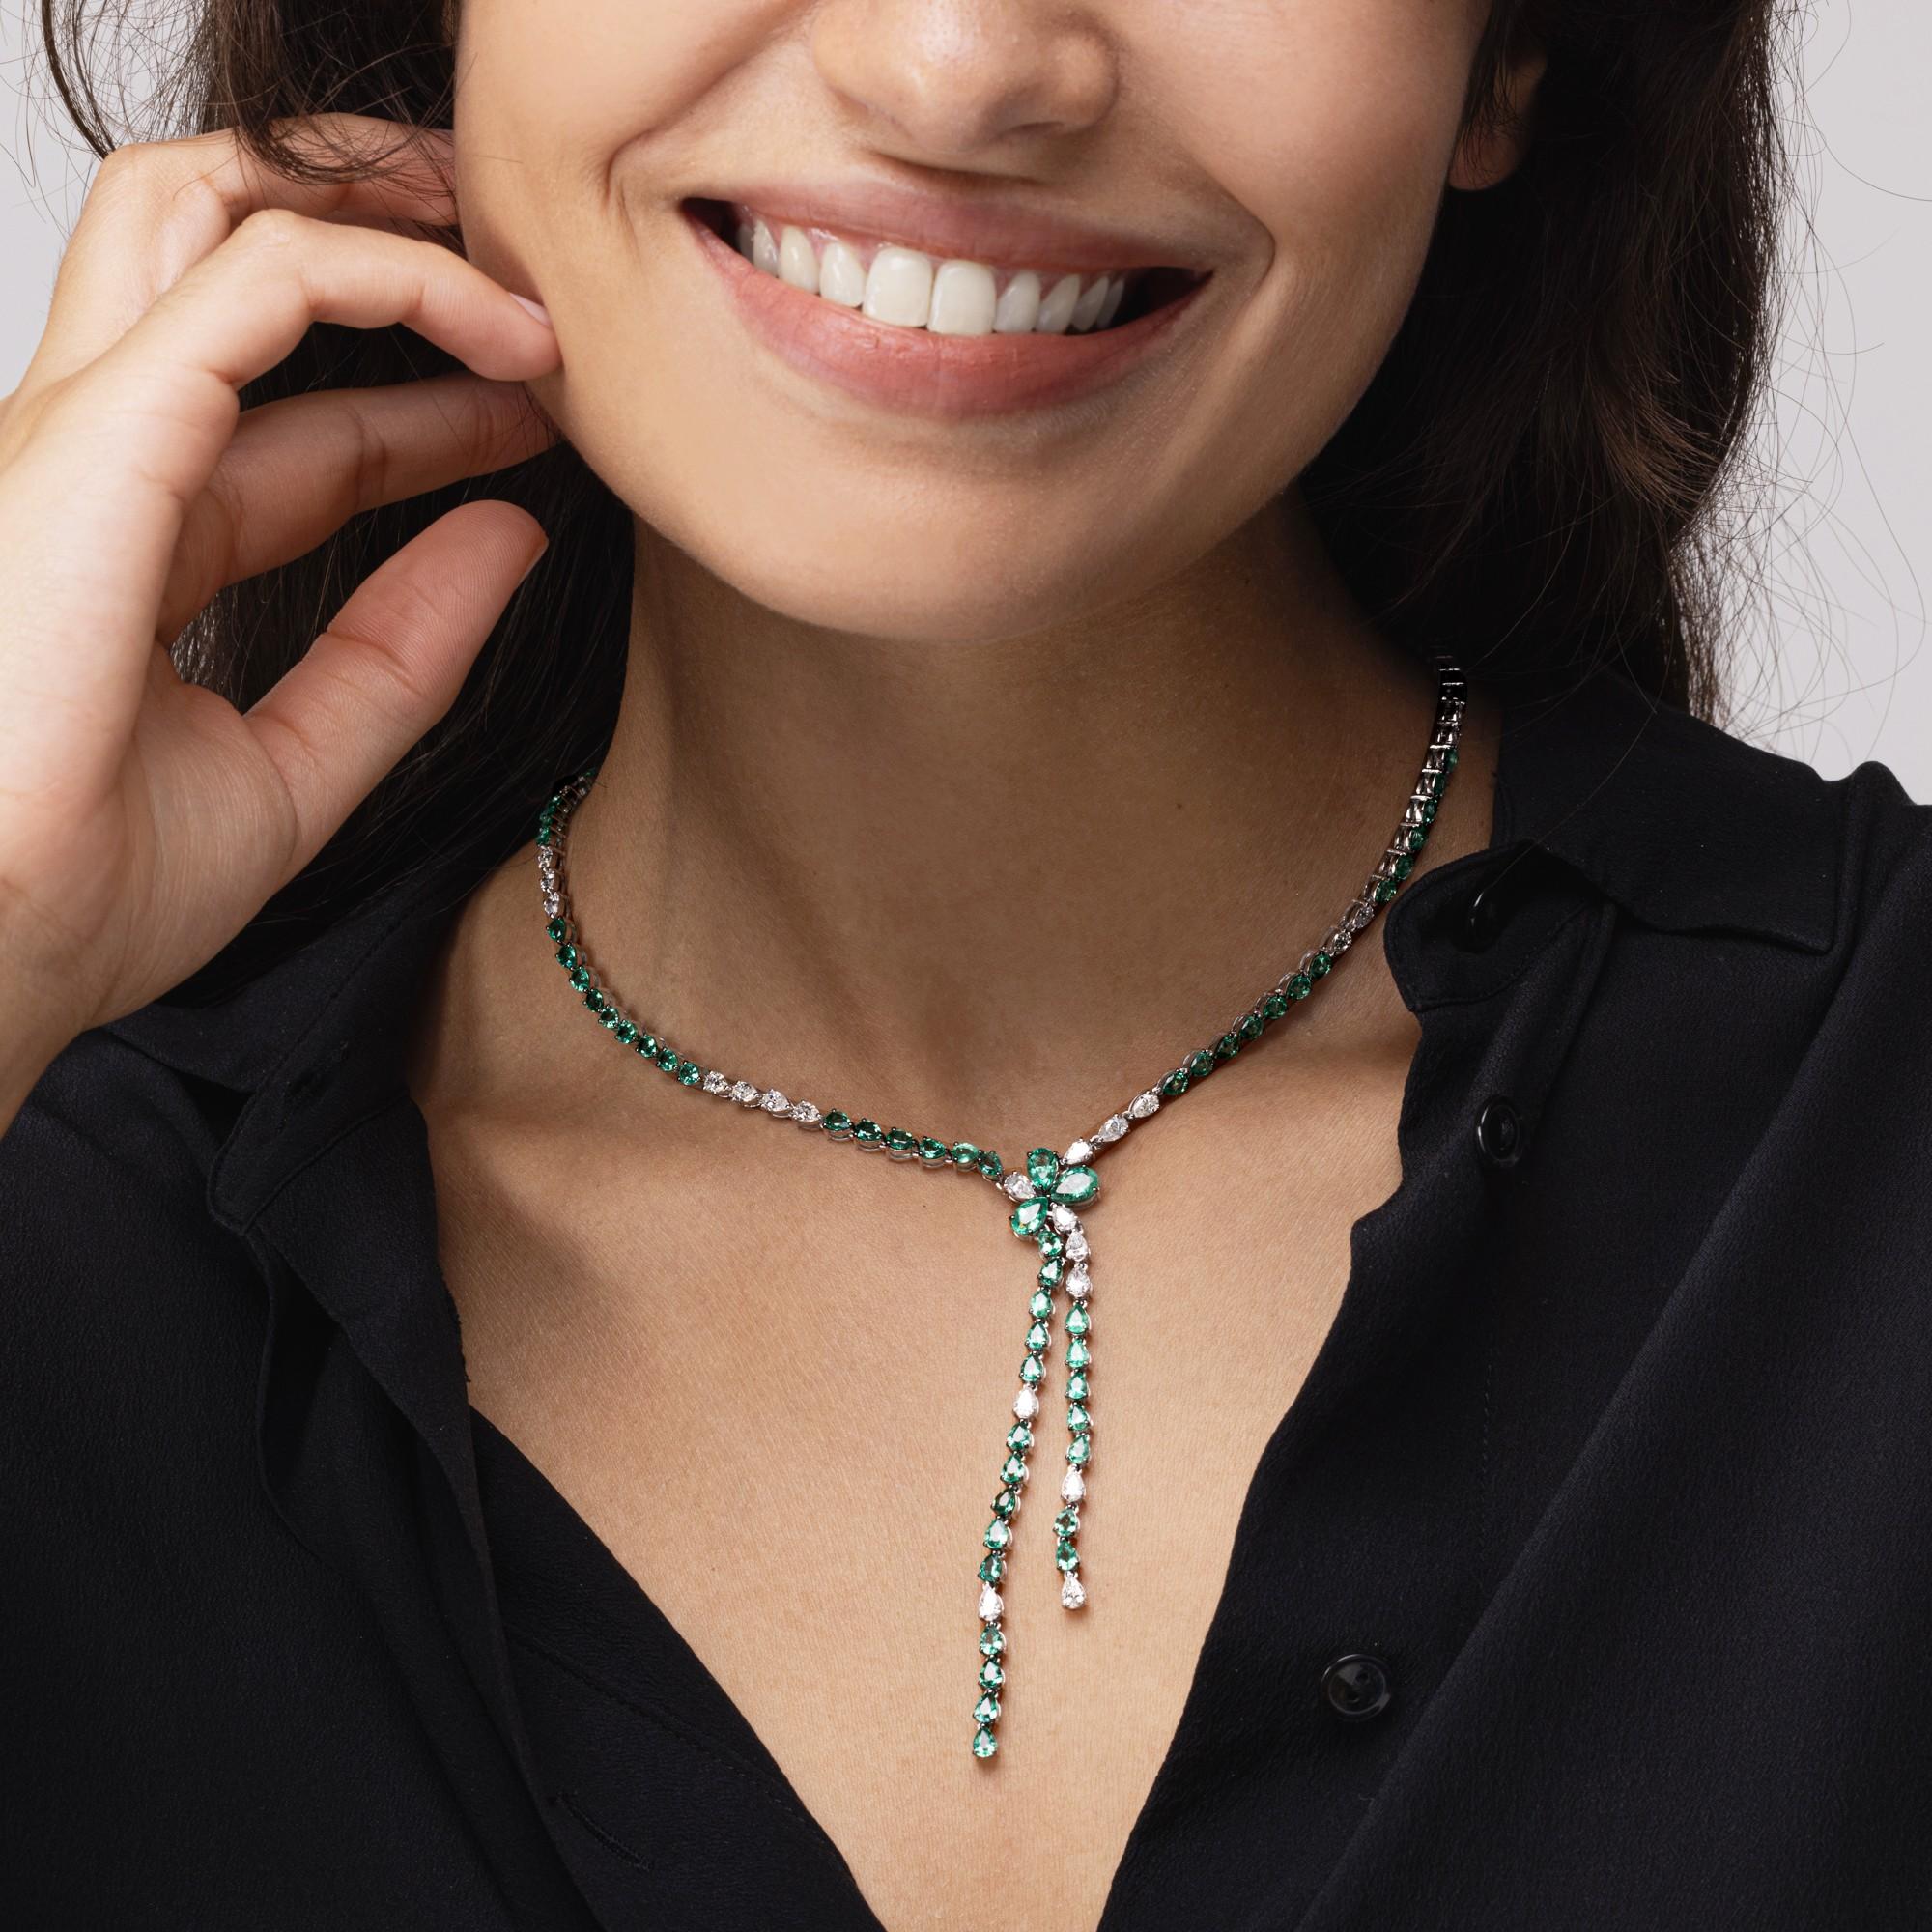 Alex Jona design collection, hand crafted in Italy, stunning 18 karat white gold scarf necklace, set with 4.07 carats of white diamonds and 12.36 carats of emeralds.
Alex Jona jewels stand out, not only for their special design and for the excellent